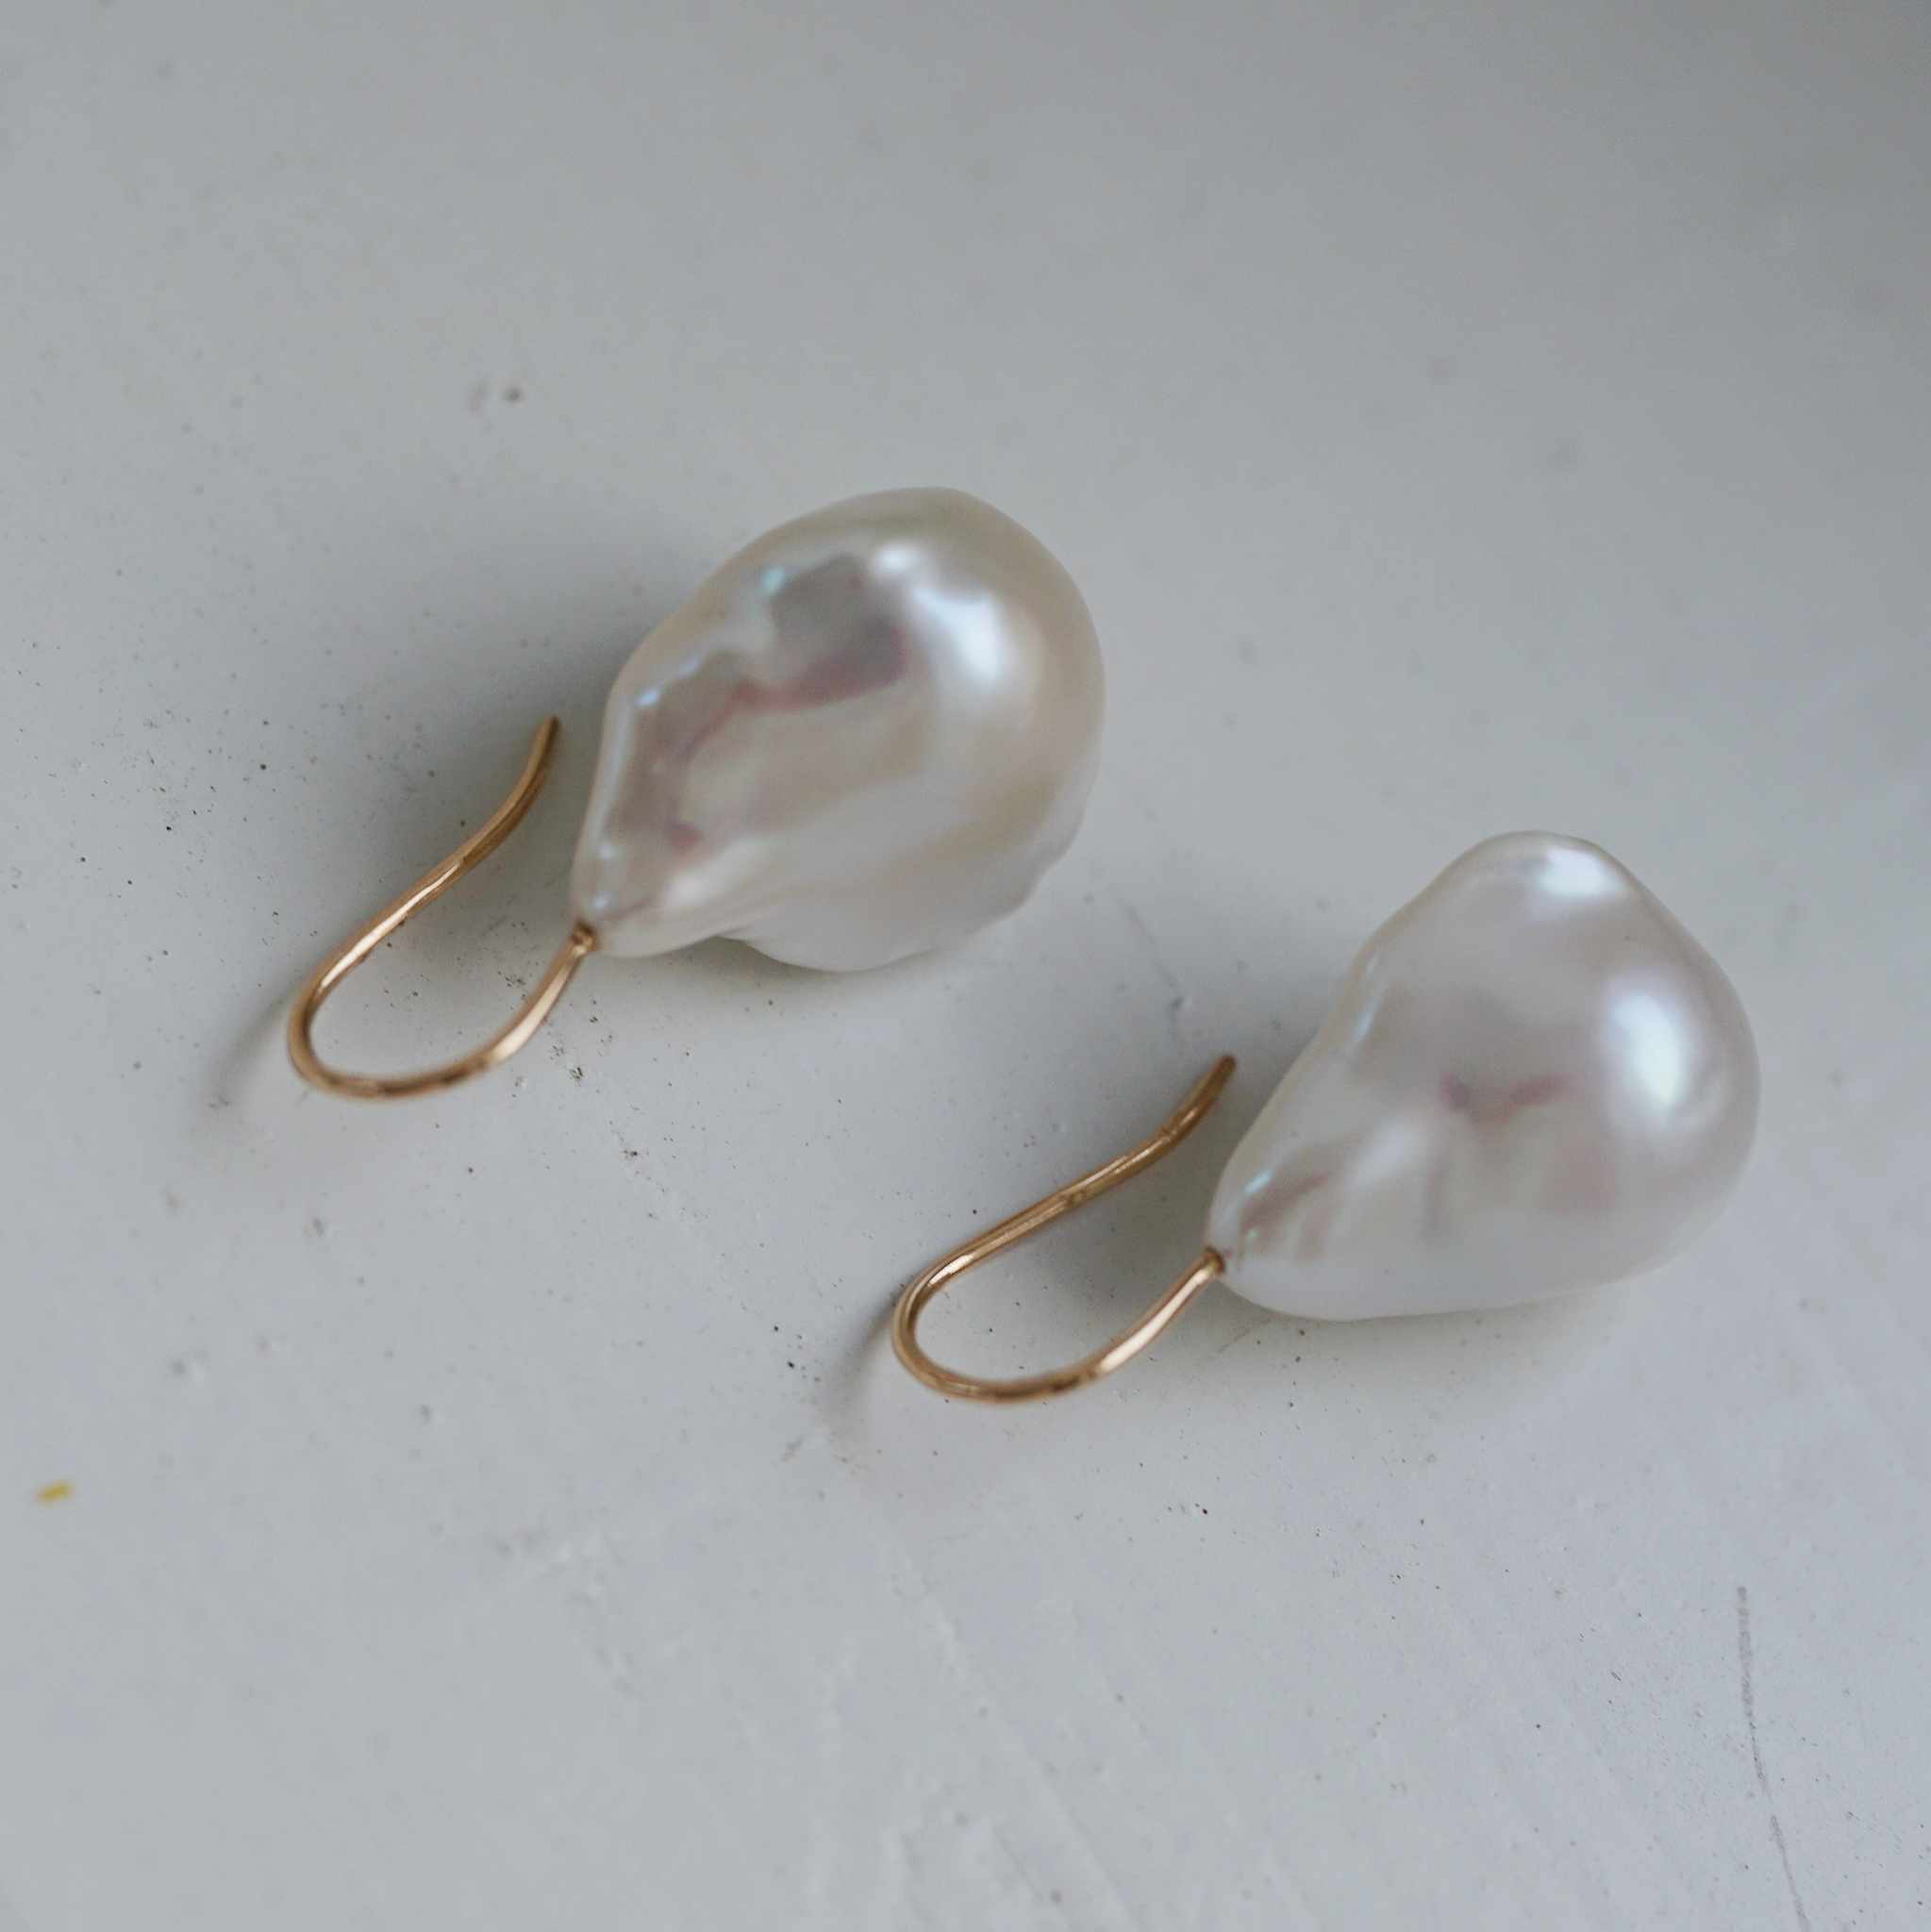 "Pearl drop" earrings in gold with baroque freshwater pearls